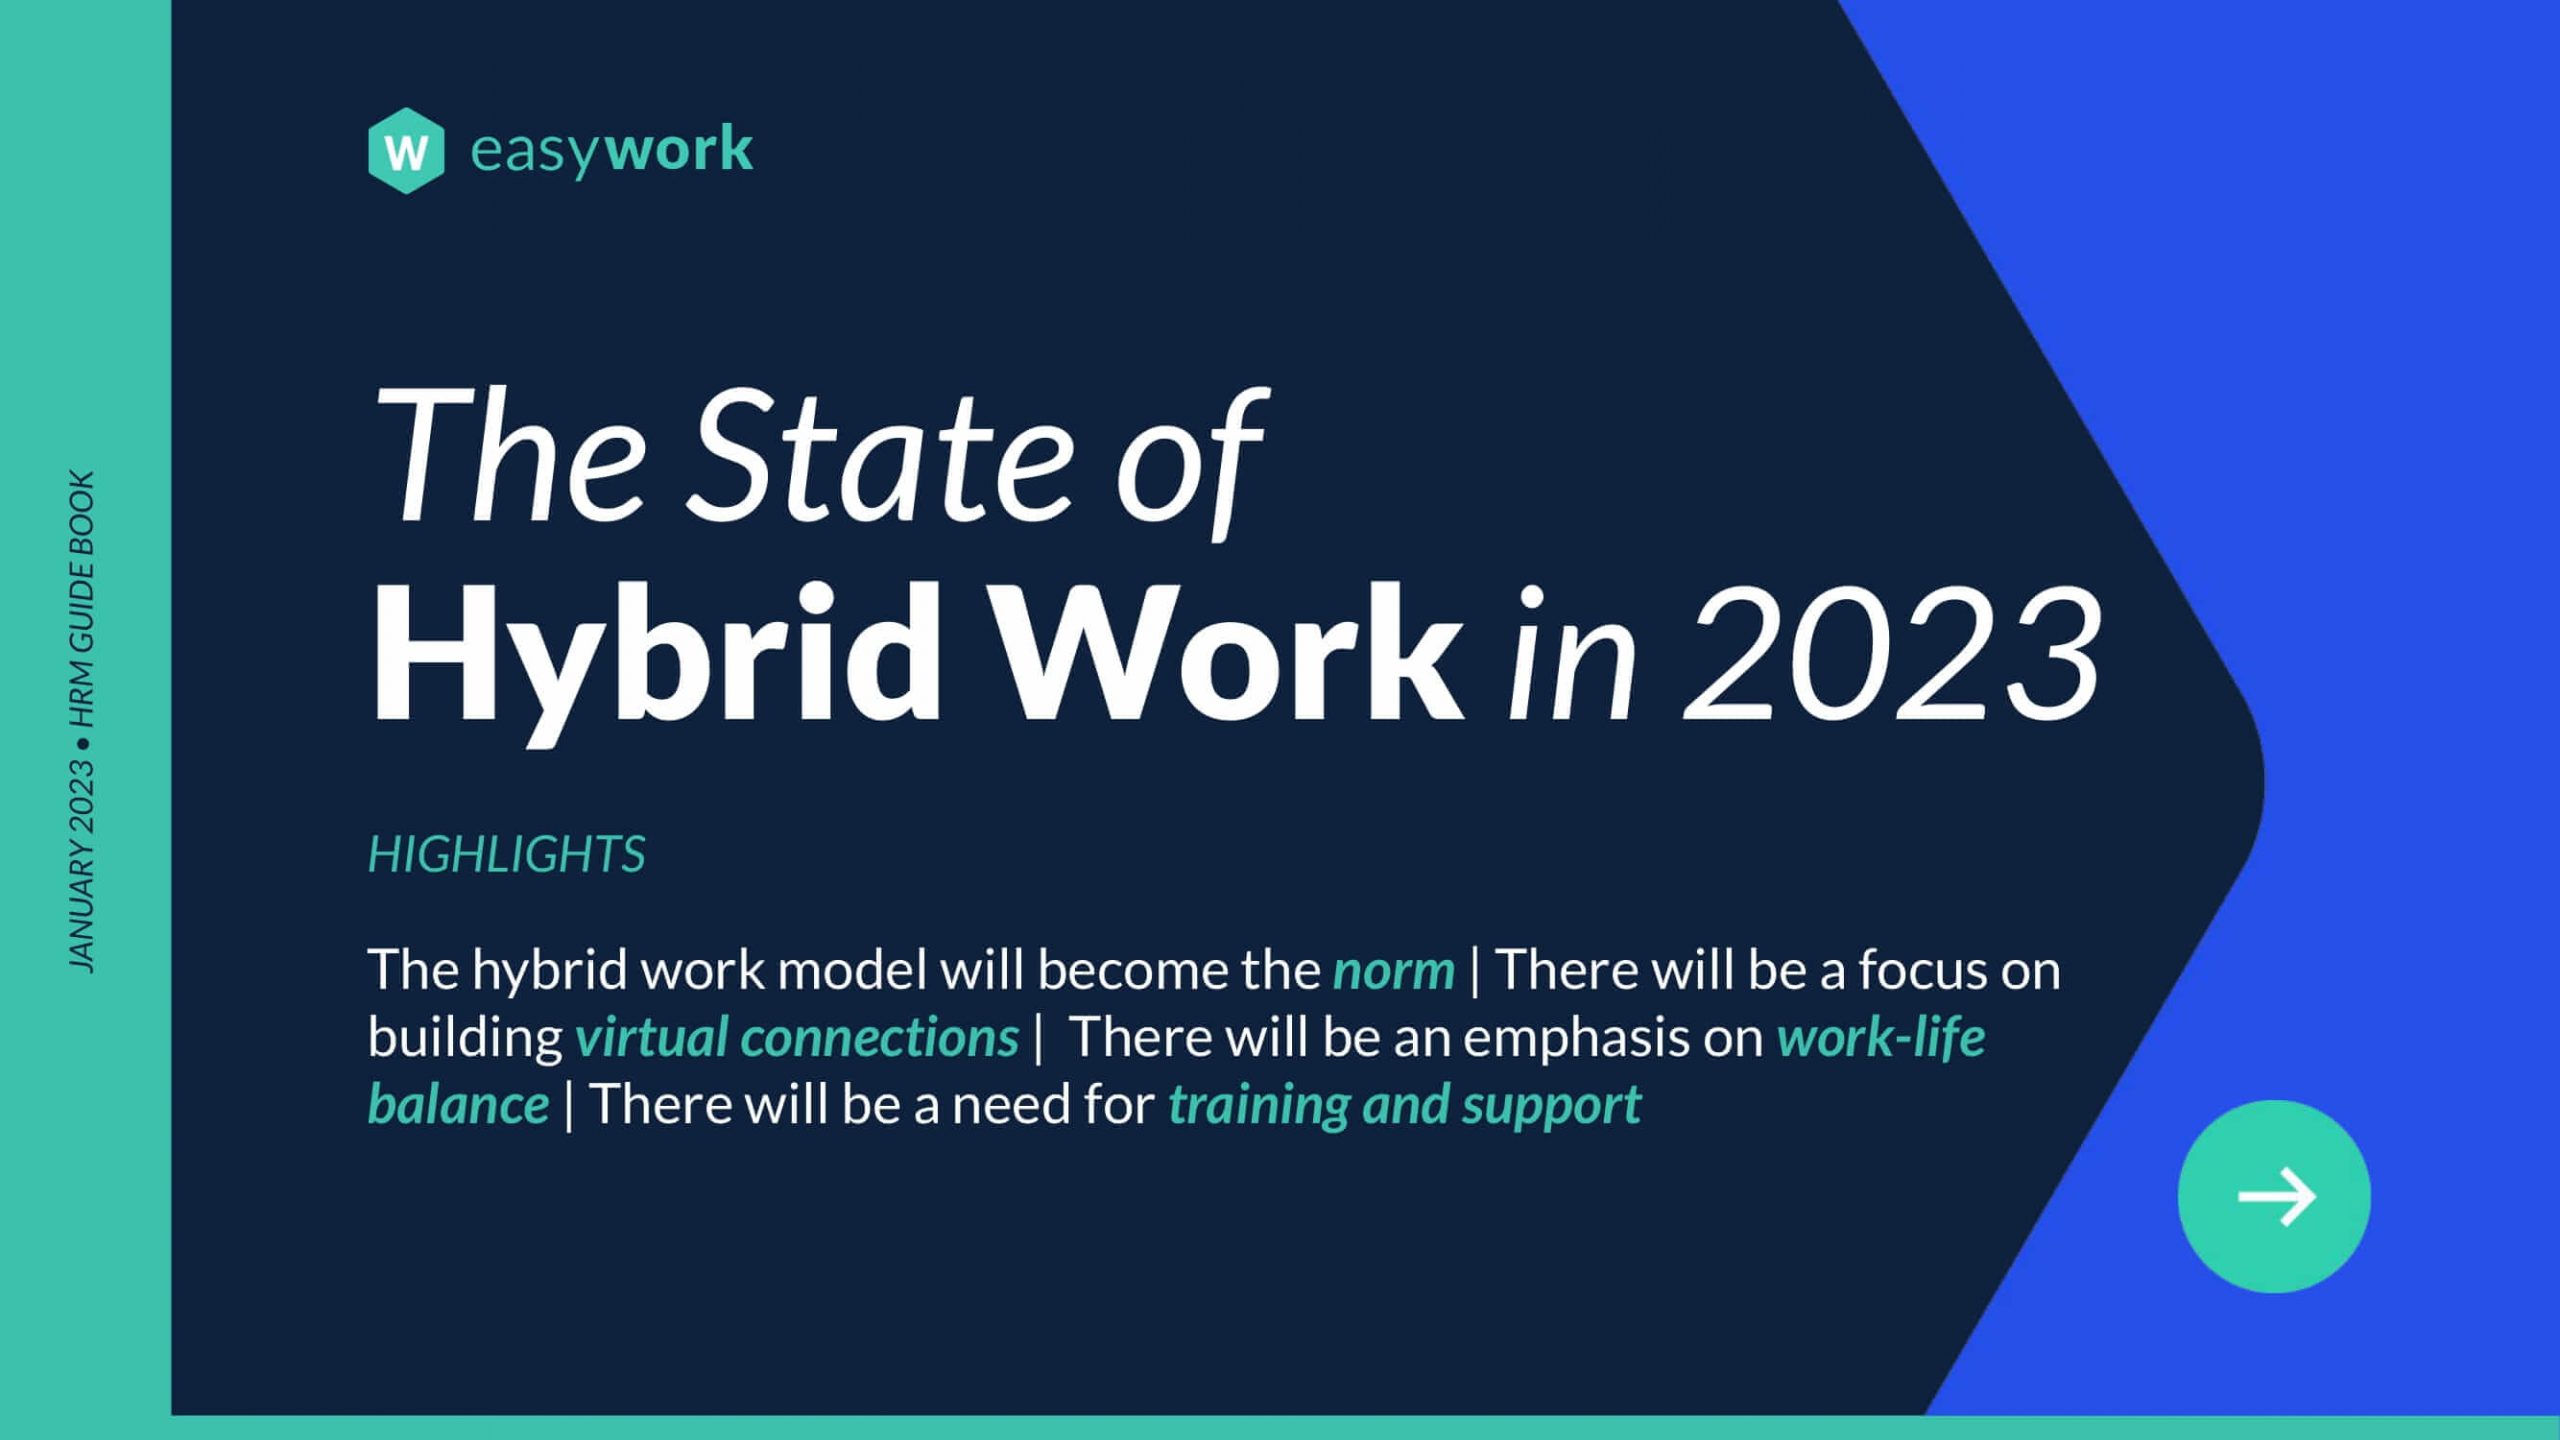 The State of Hybrid Work in 2023